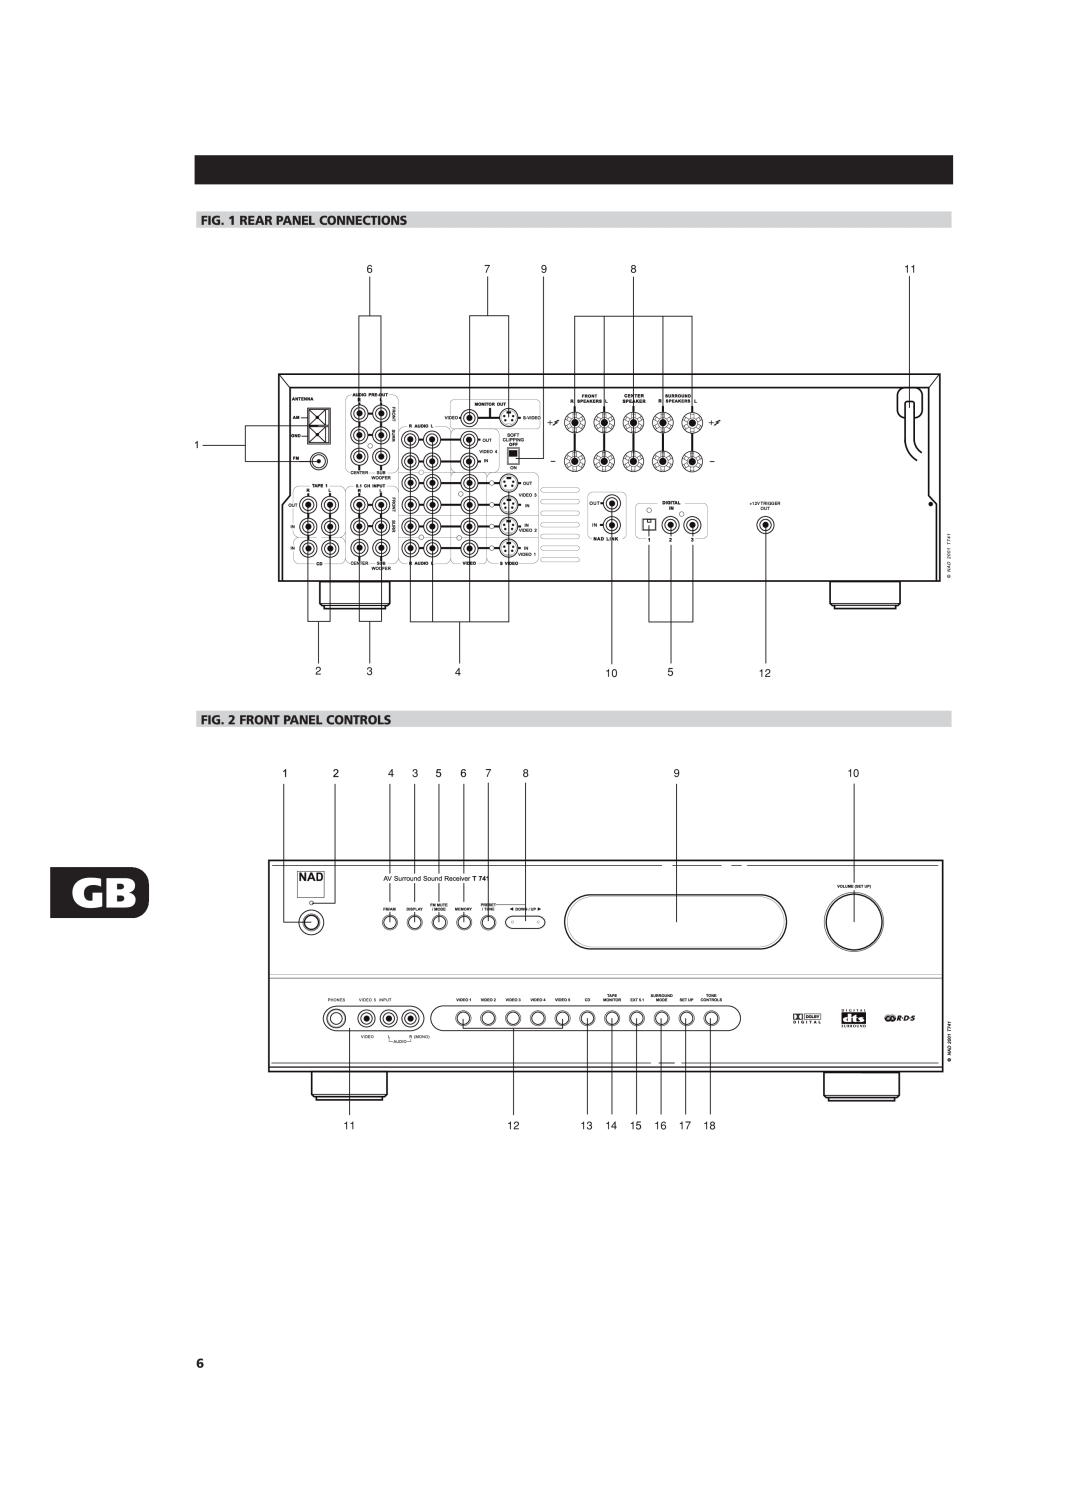 NAD T741 owner manual Rear Panel Connections, Front Panel Controls, +12V TRIGGER 